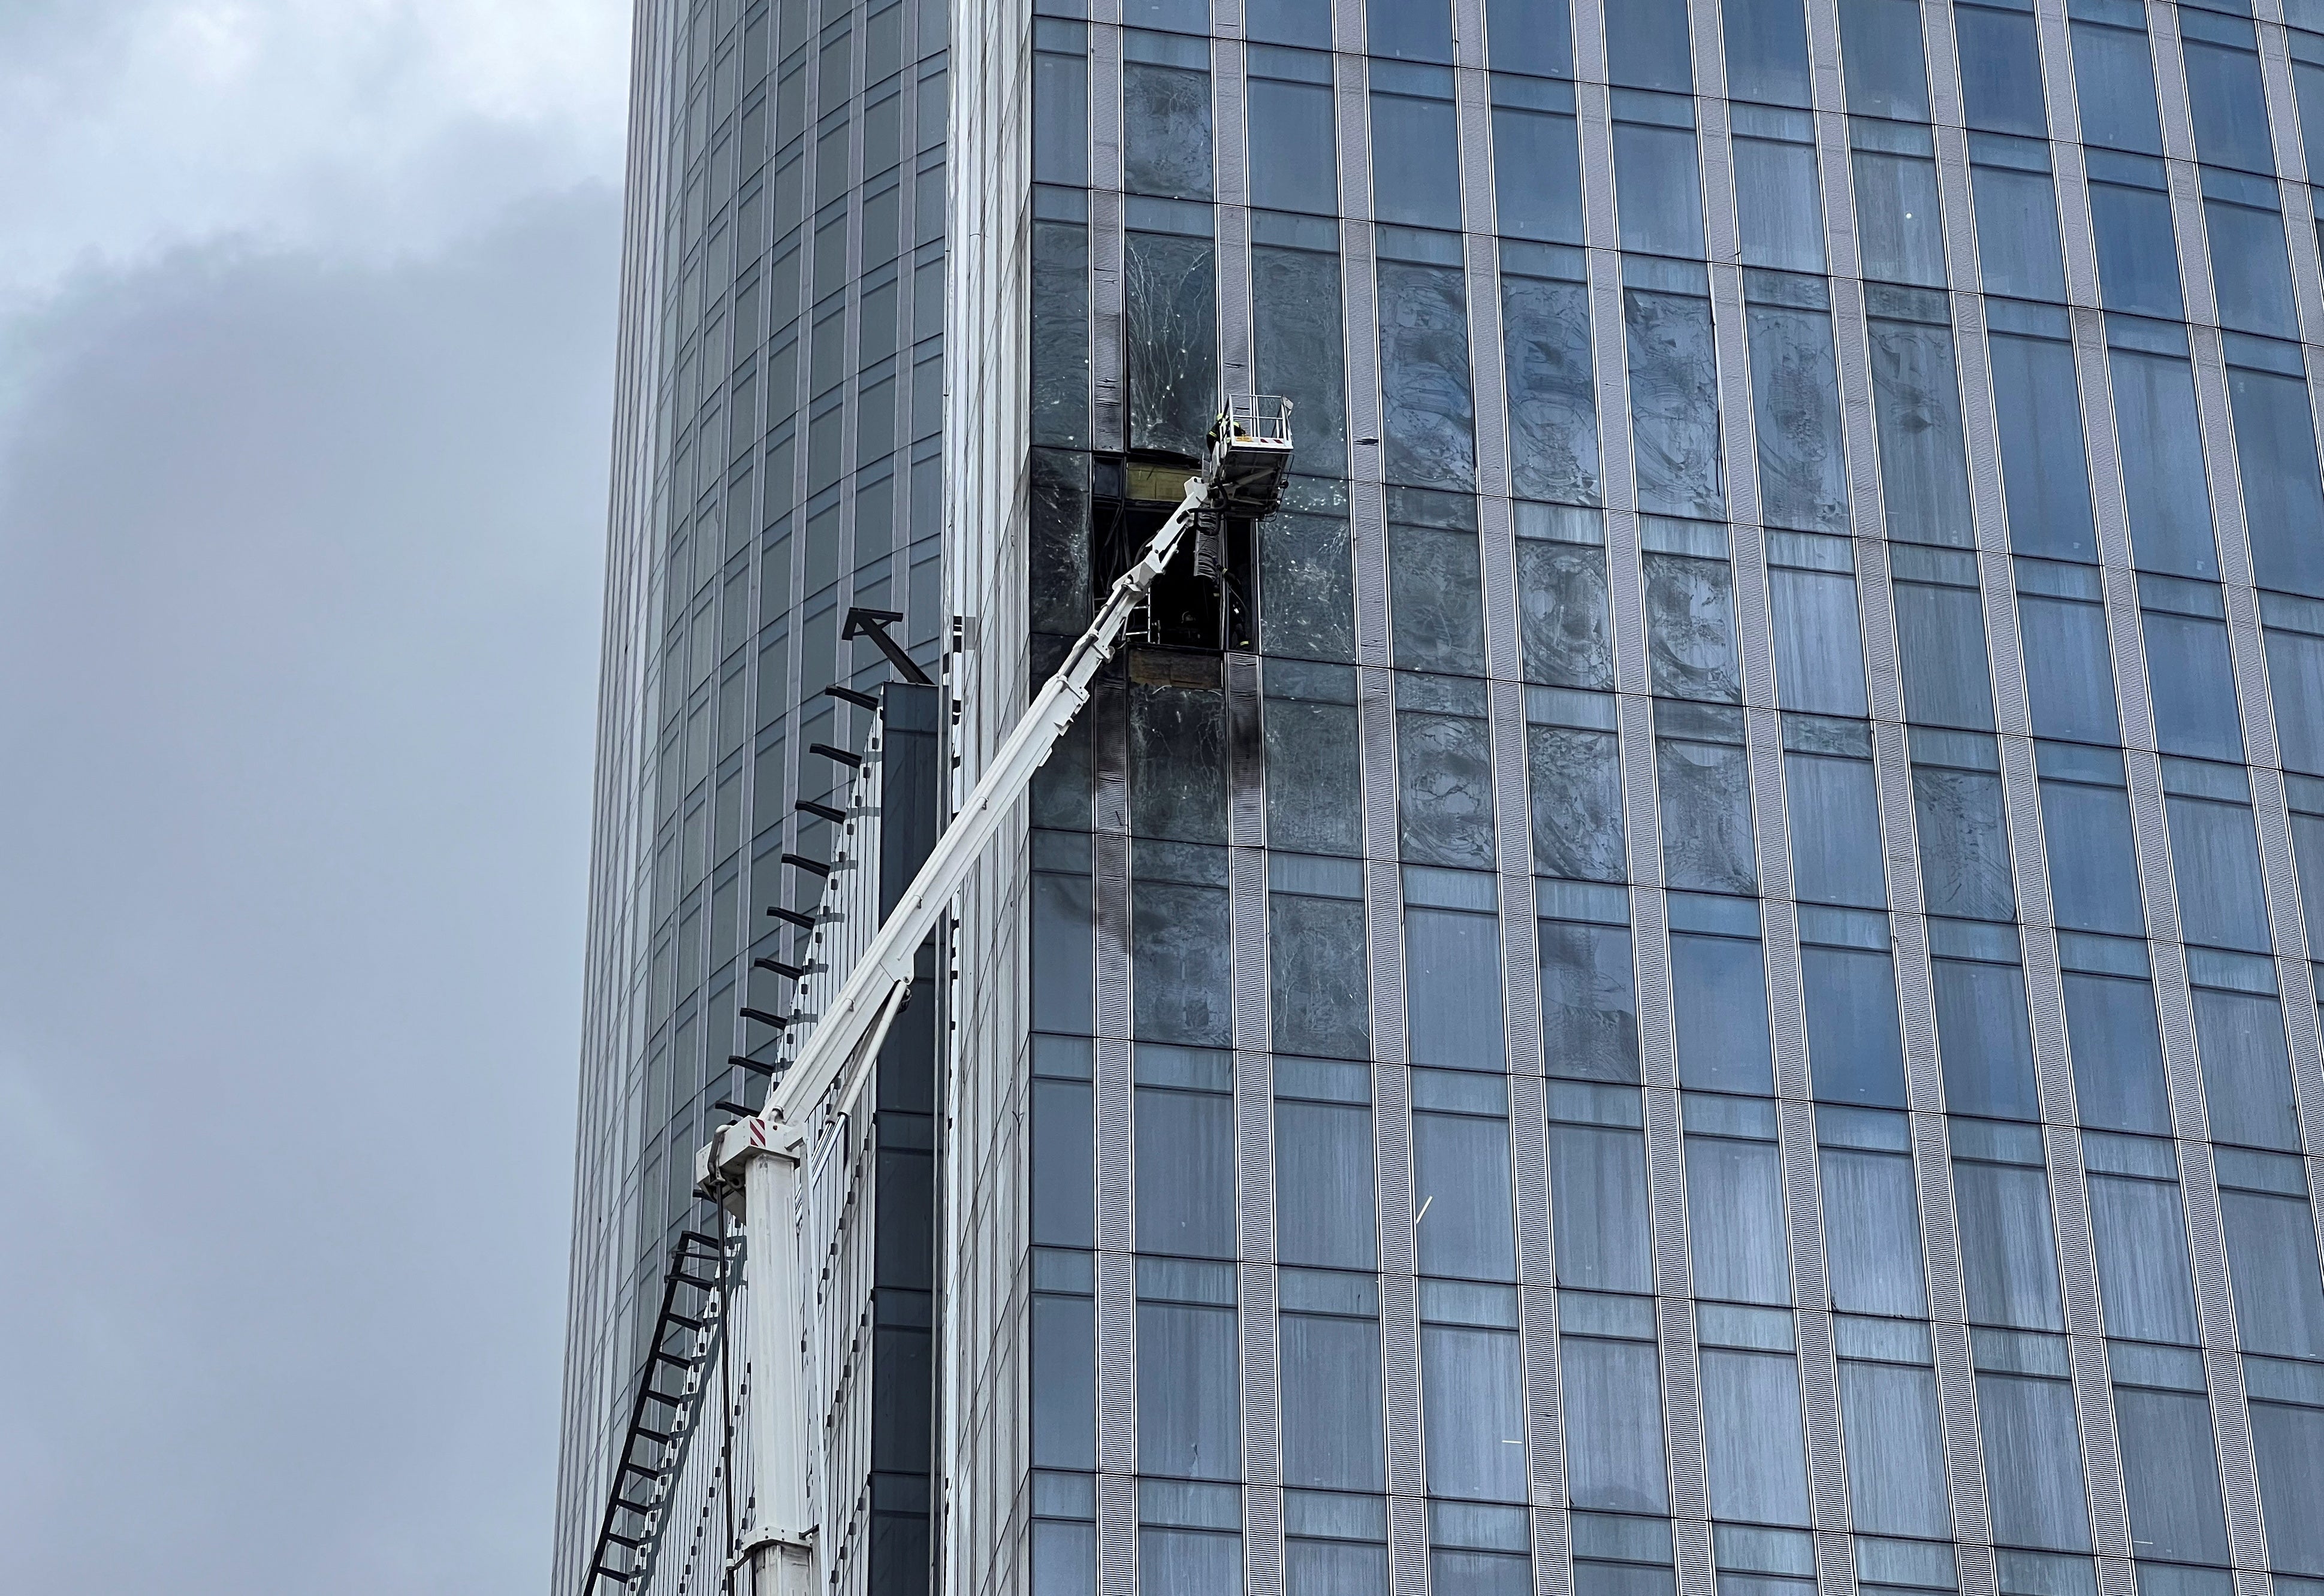 A view shows the damaged facade of a high-rise building in the Moscow City following an alleged Ukrainian drone attack